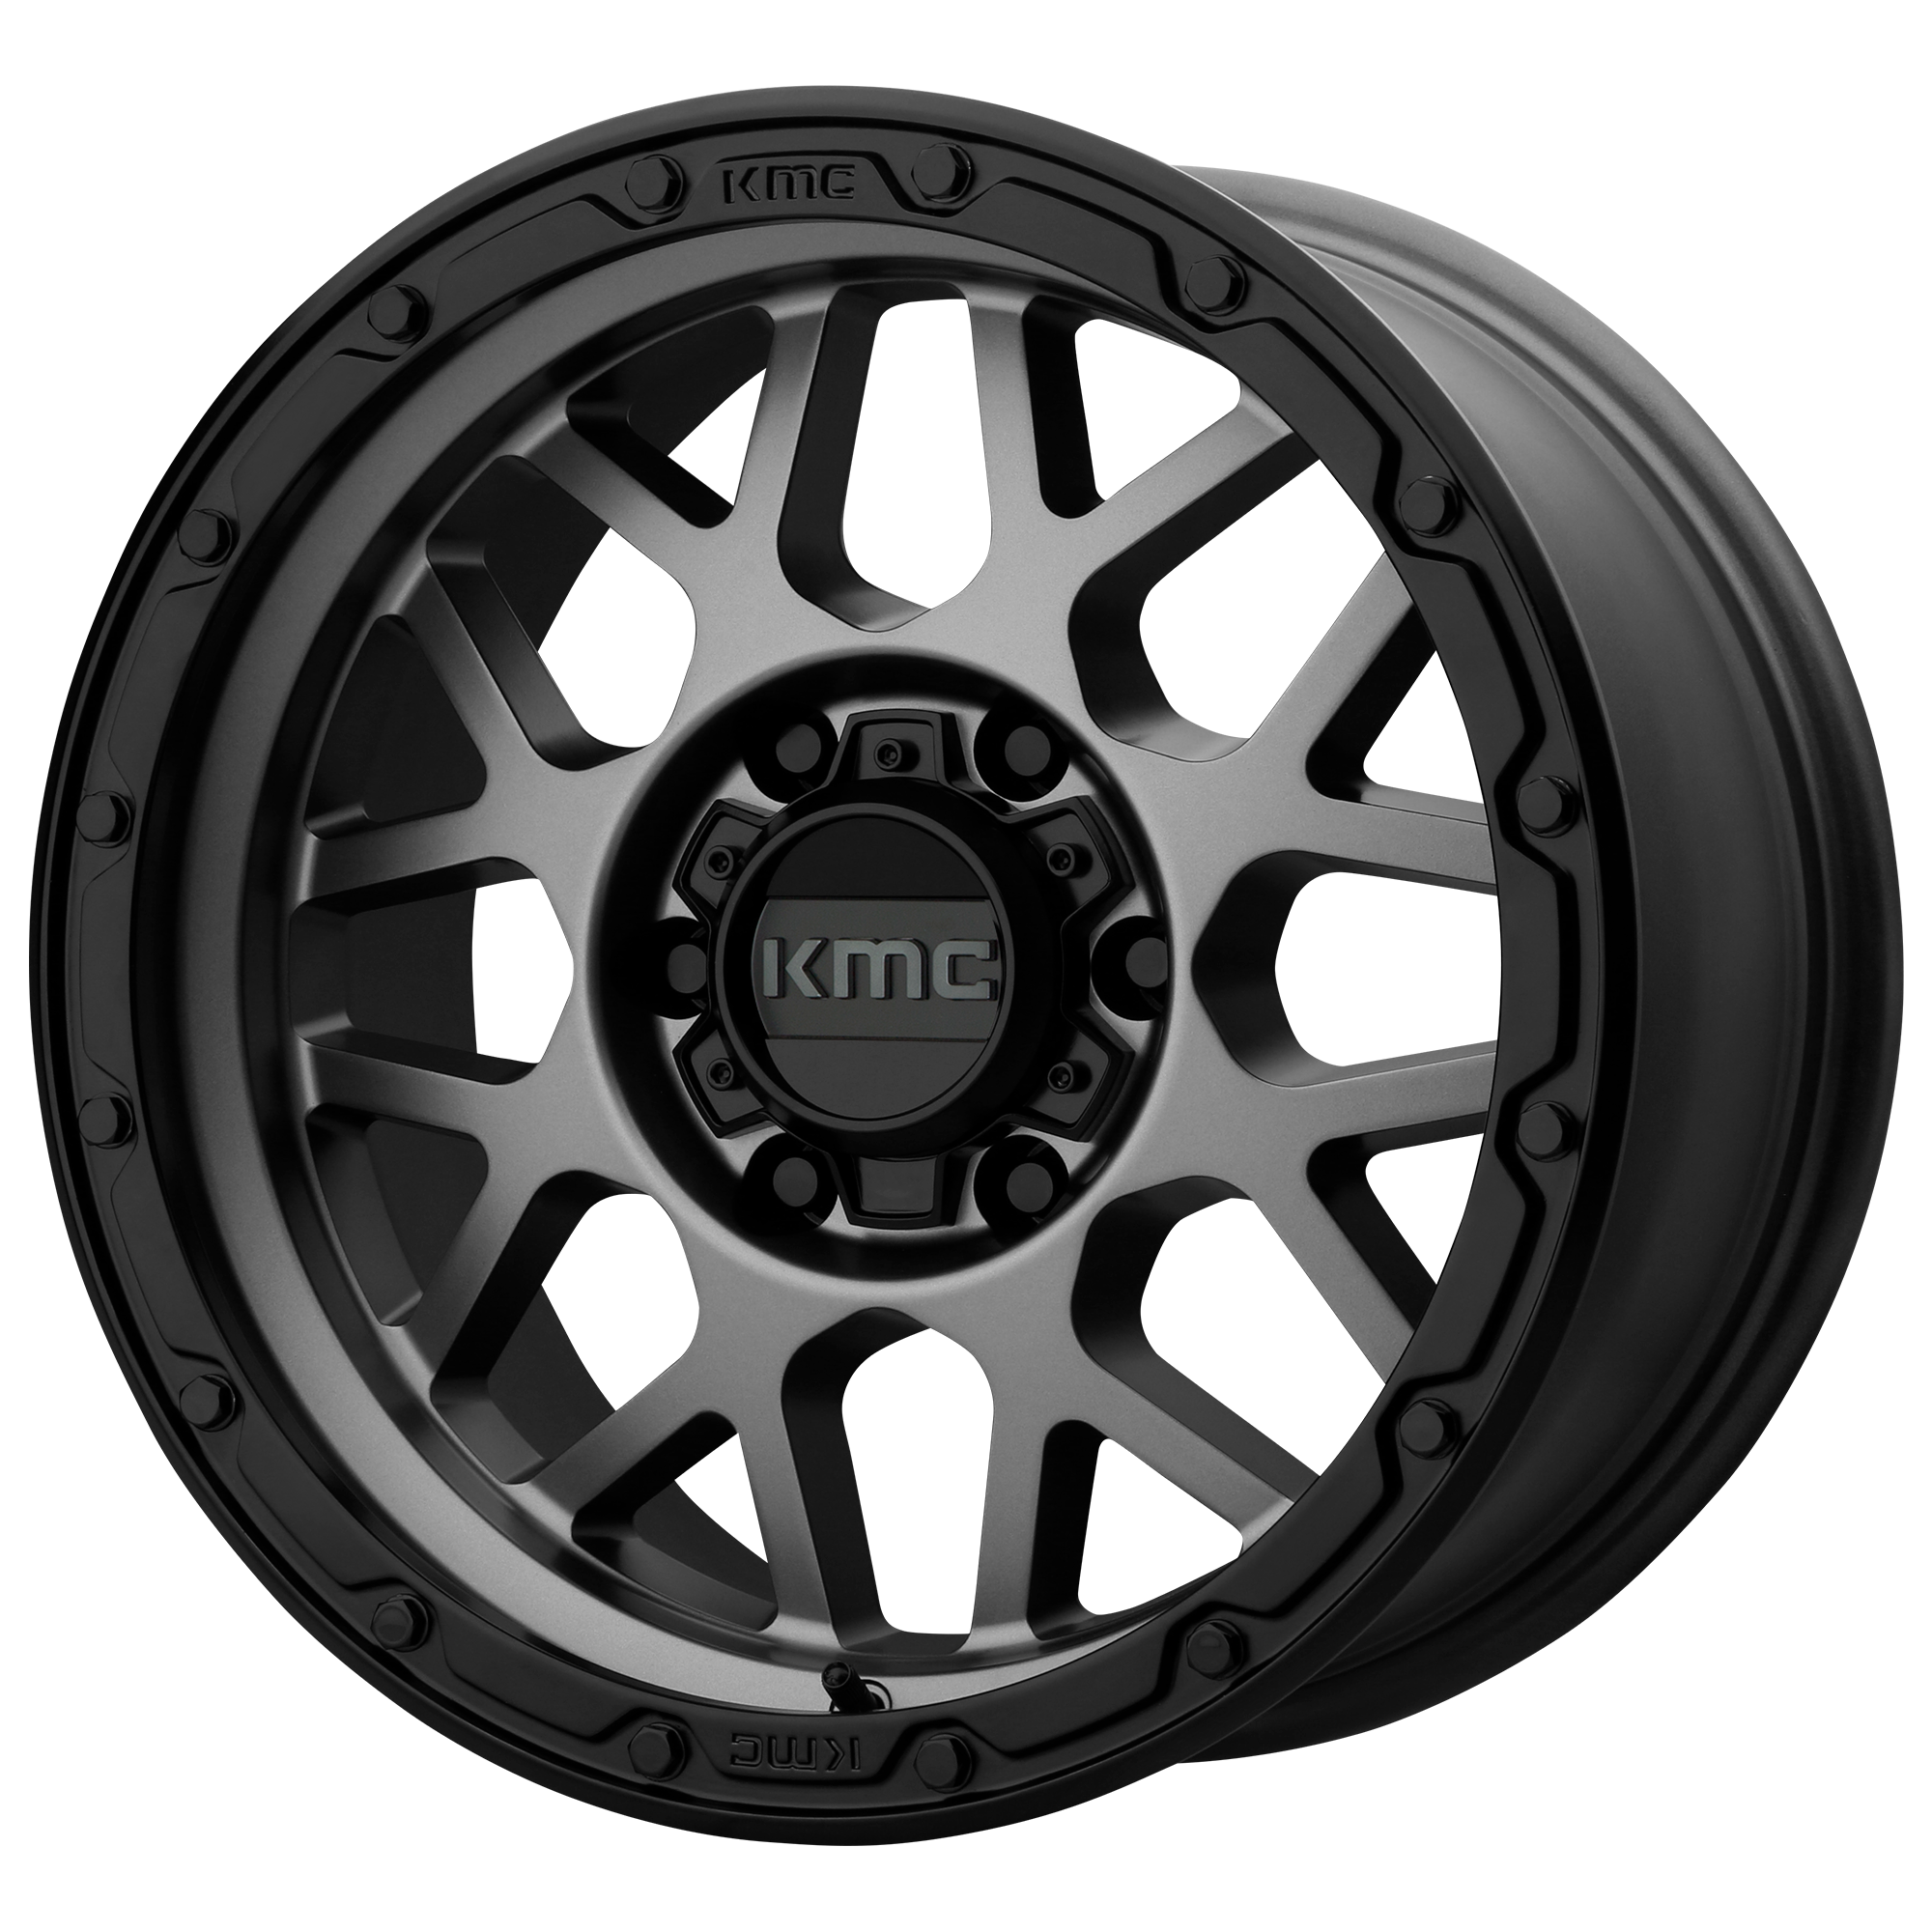 GRENADE OFF-ROAD 20x9 5x150.00 MATTE GRAY W/ MATTE BLACK LIP (18 mm) - Tires and Engine Performance